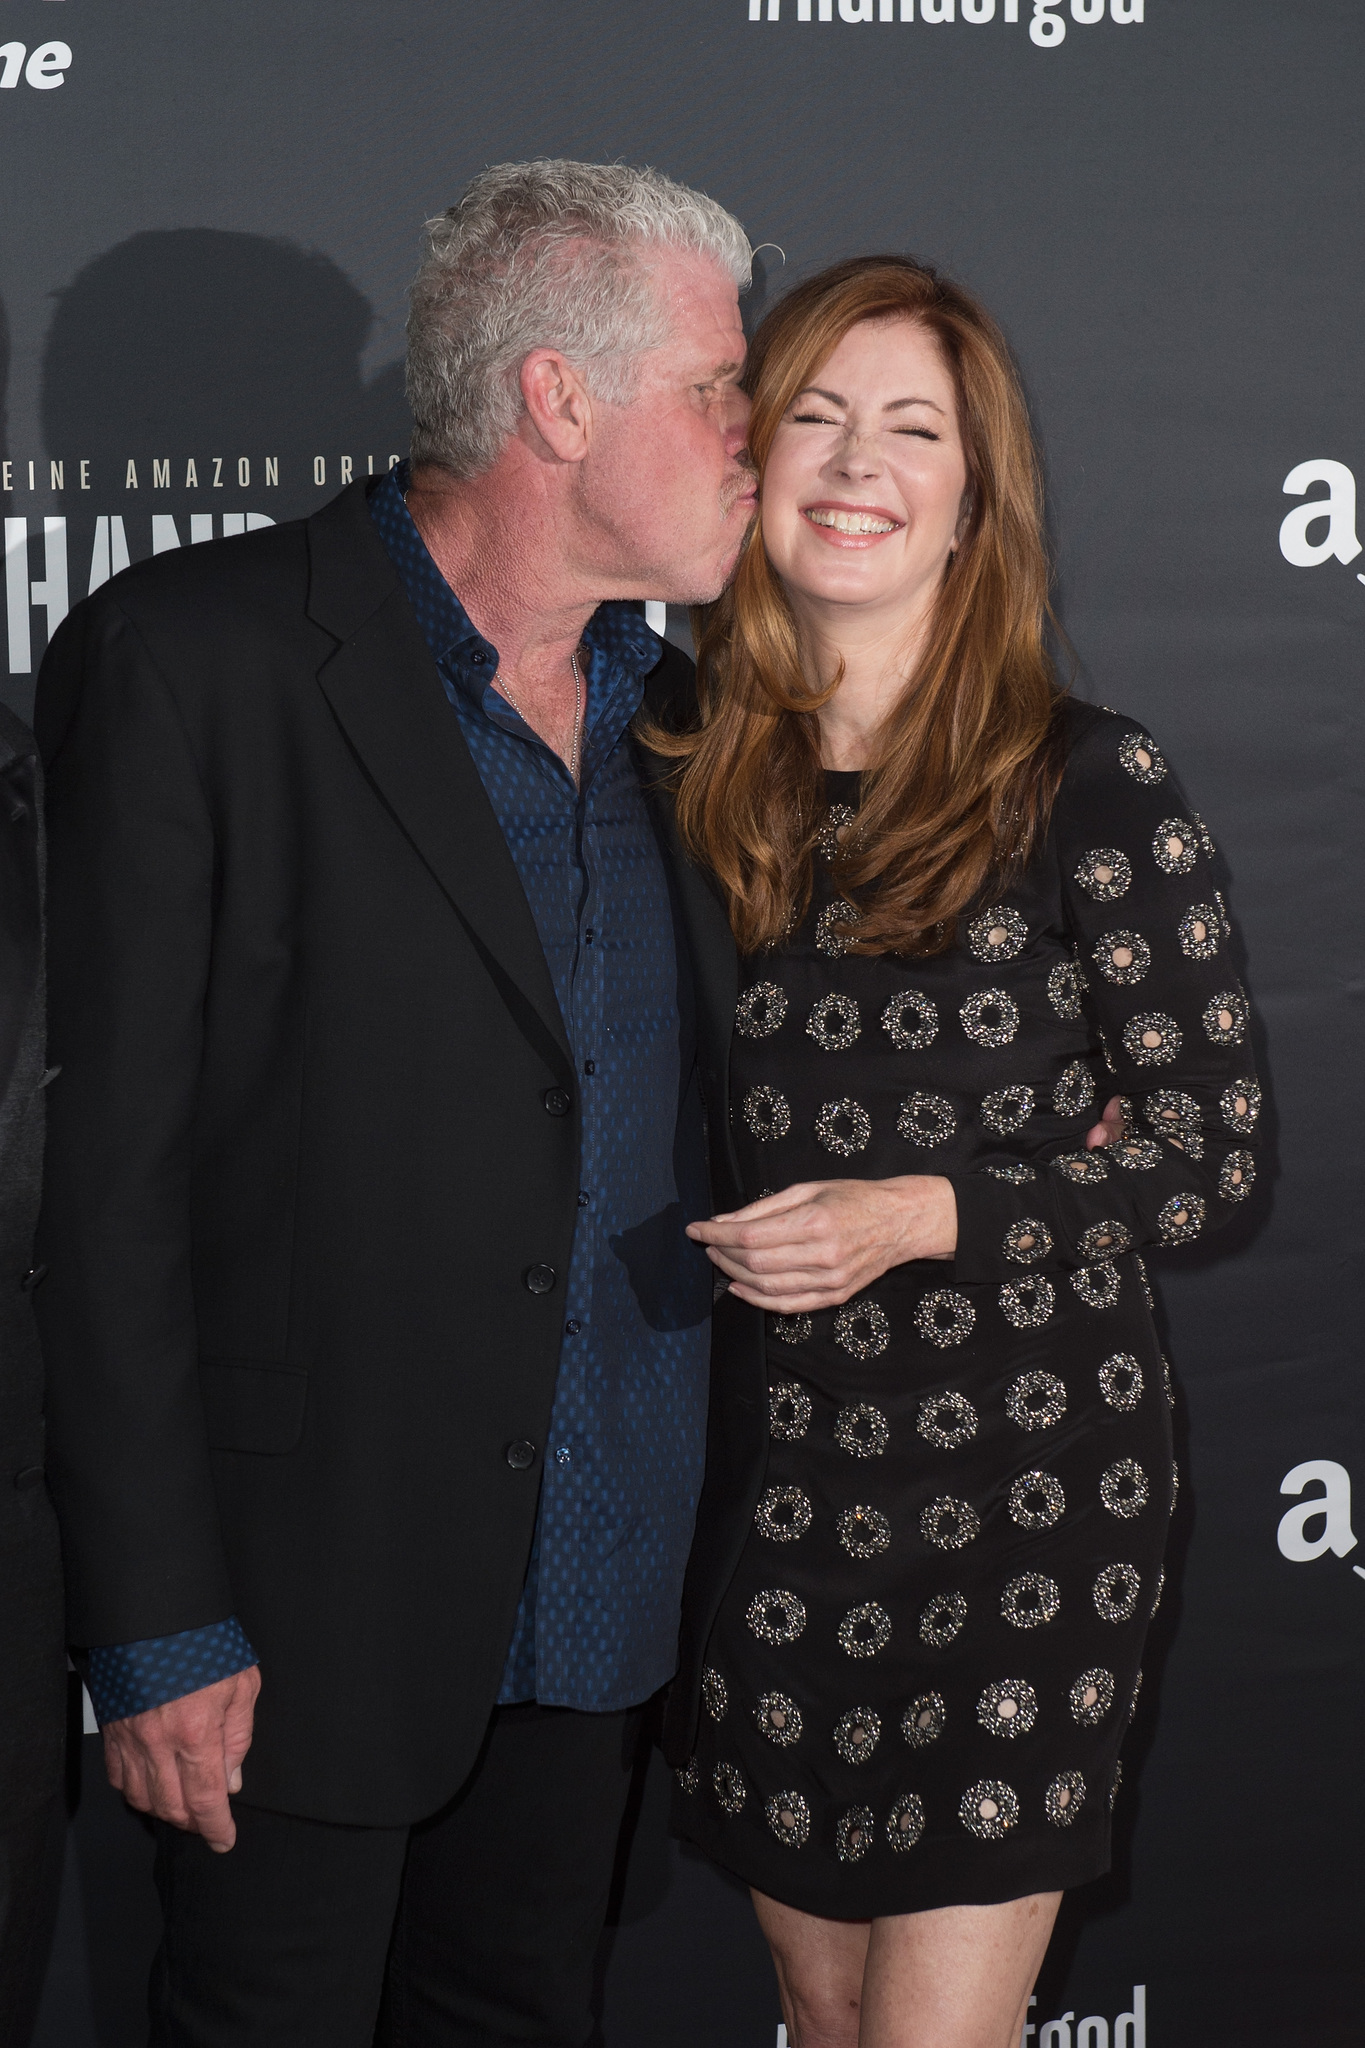 Ron Perlman and Dana Delany at event of Hand of God (2014)